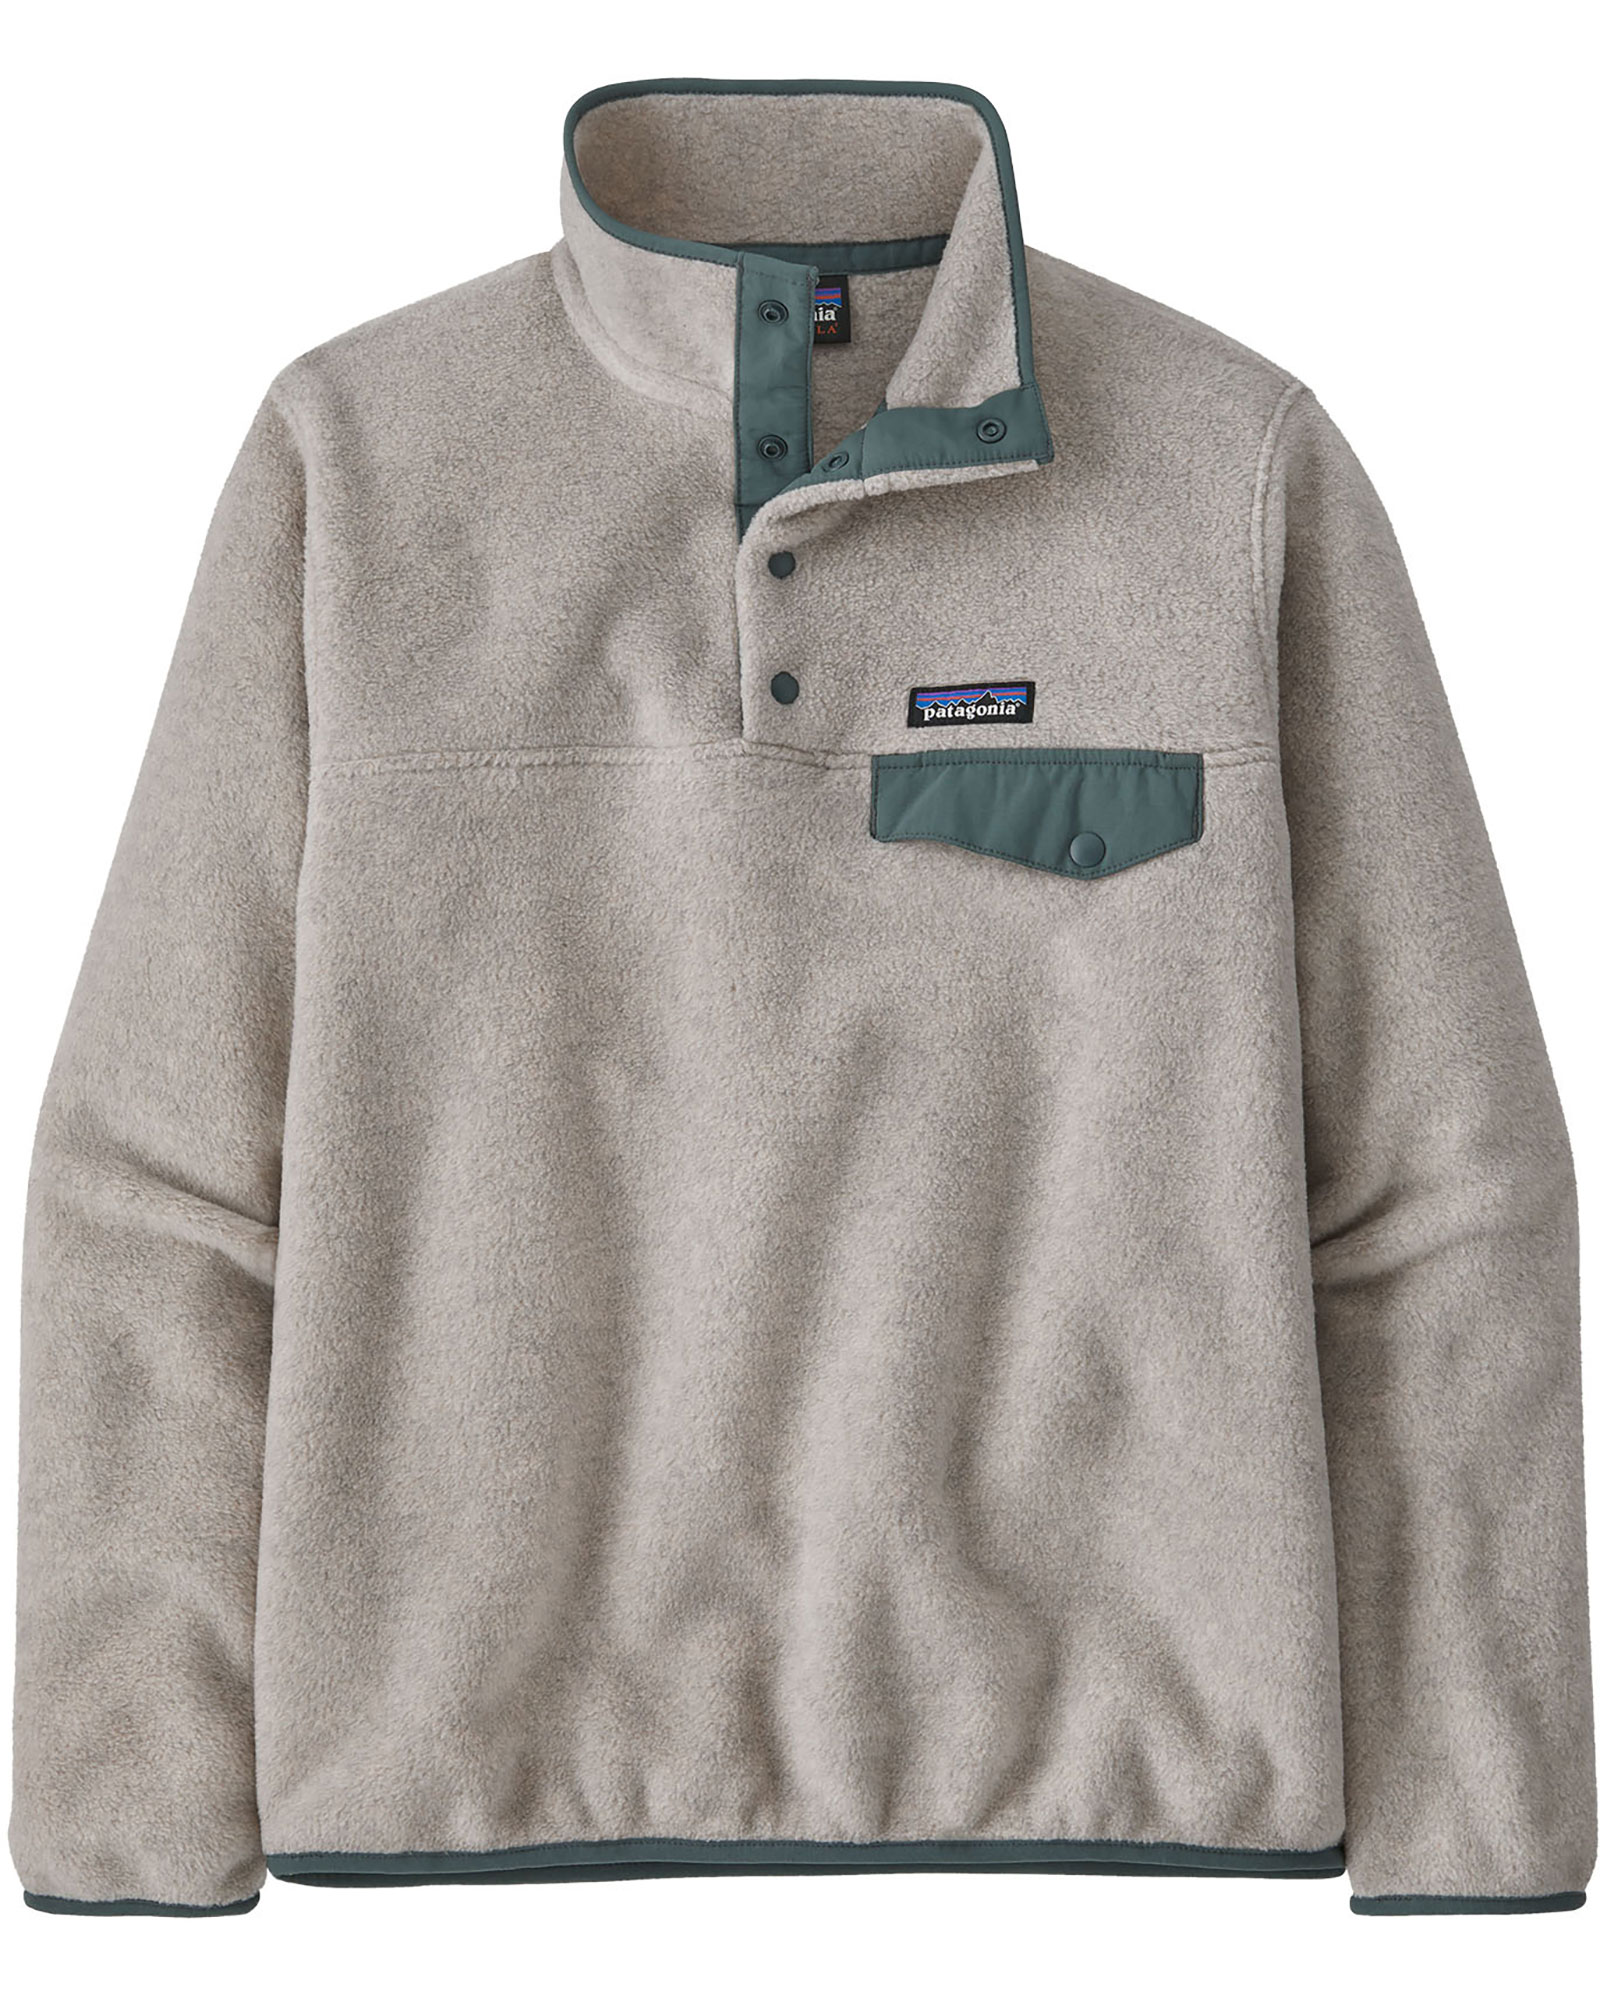 Patagonia Lwt Synchilla Women’s Snap T Pullover - Oatmeal Heather w/Nouveau Green L